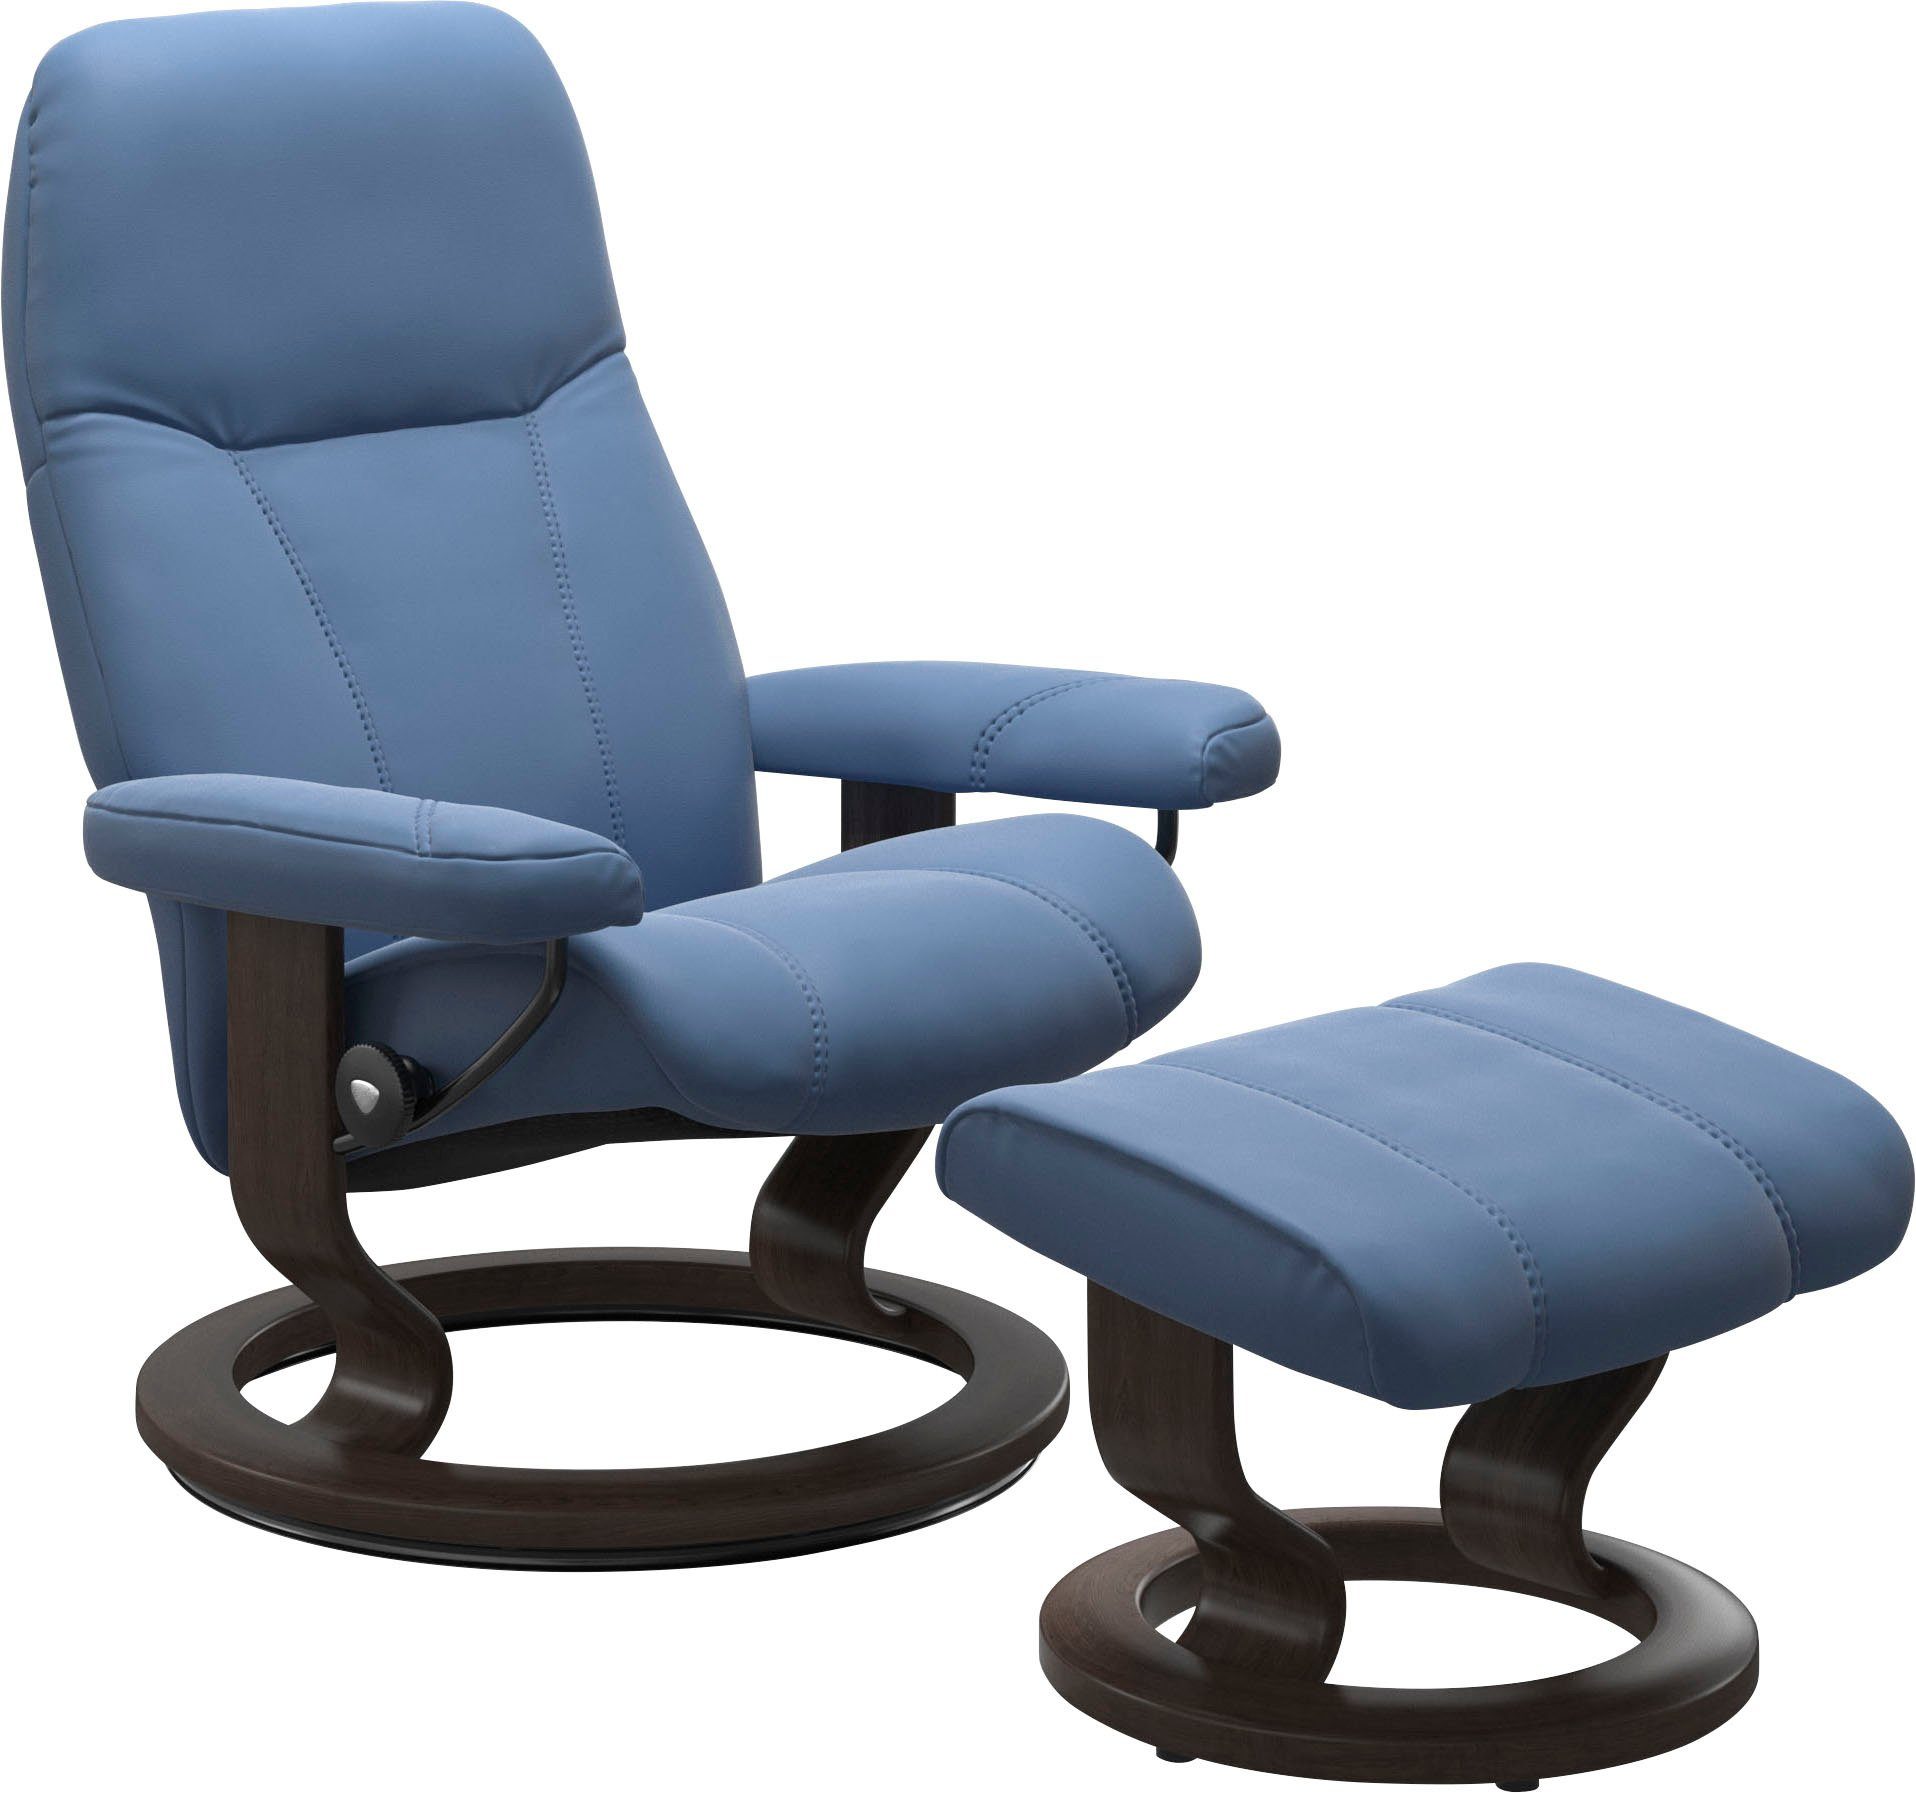 Consul, Wenge Gestell Base, Classic S, Stressless® mit Größe Relaxsessel